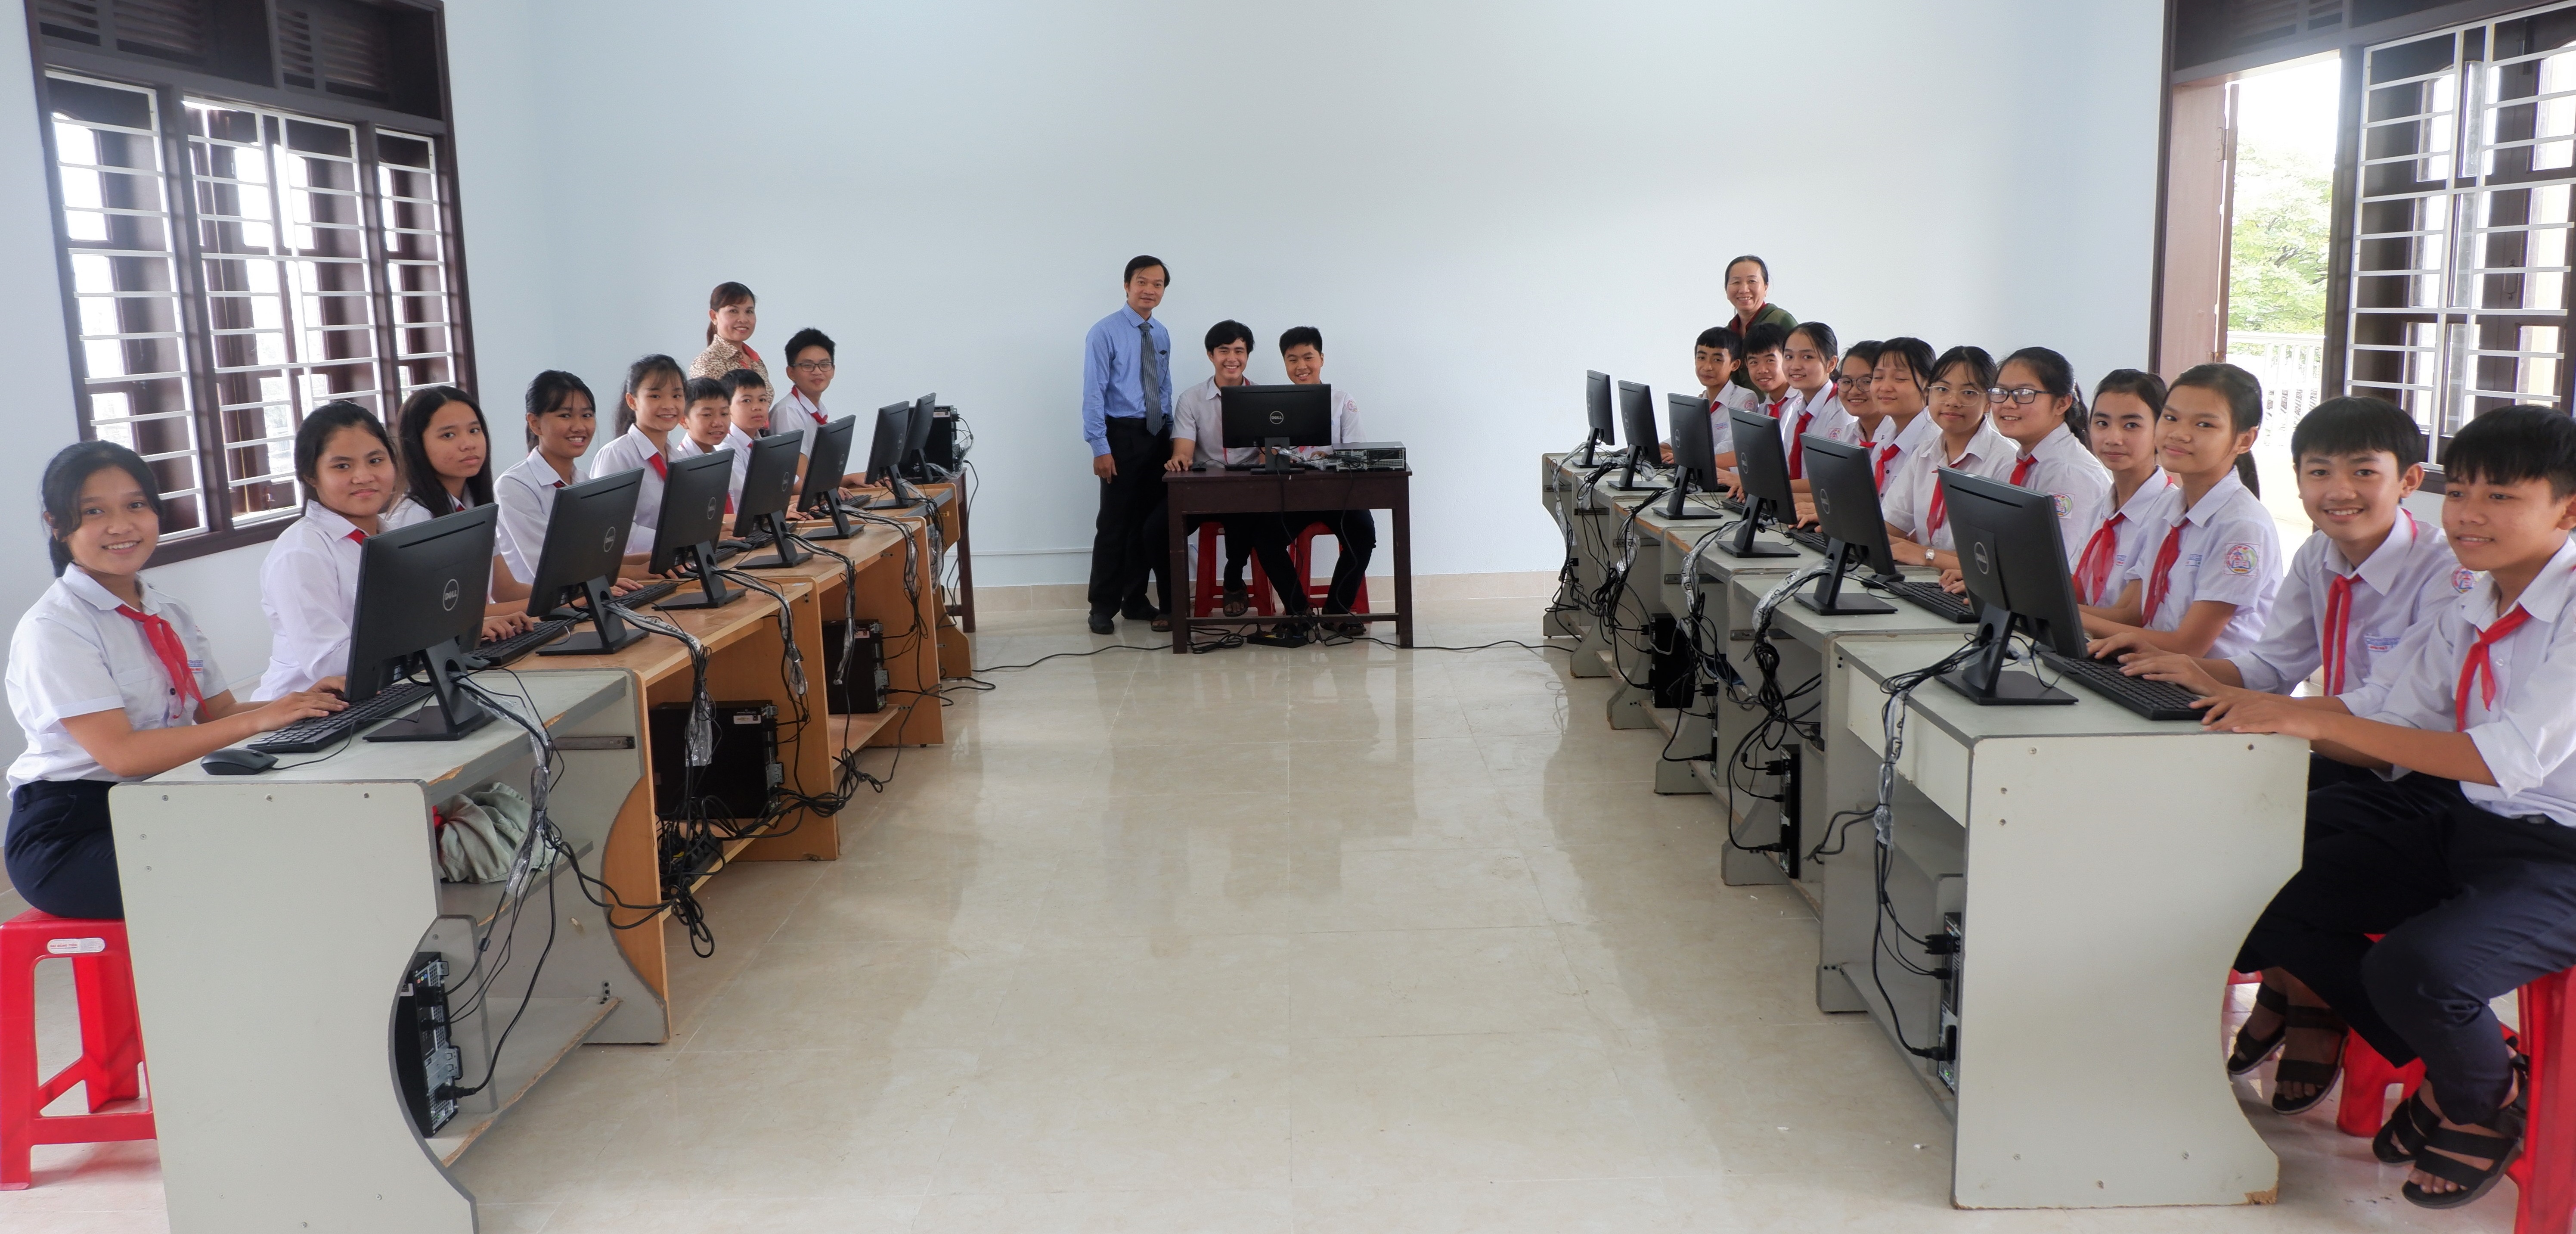 Rural IT education in central Vietnamese province